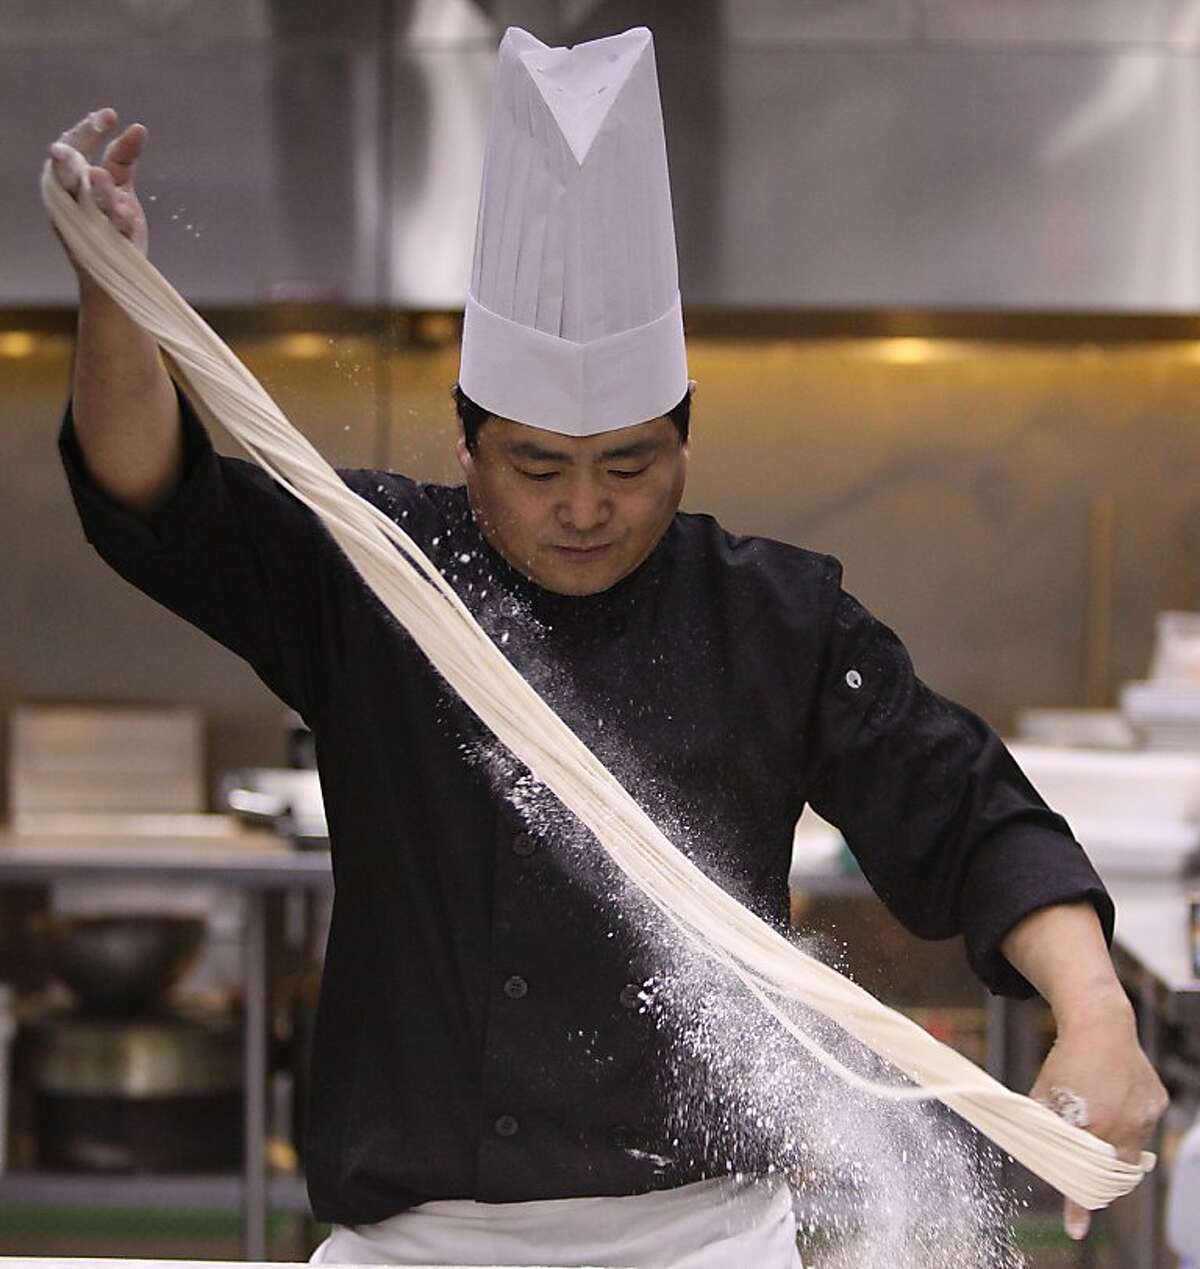 Master chef de cuisine Tony Wu shows how to pull noodles in Millbrae, Calif., on Thursday, August 23, 2012.